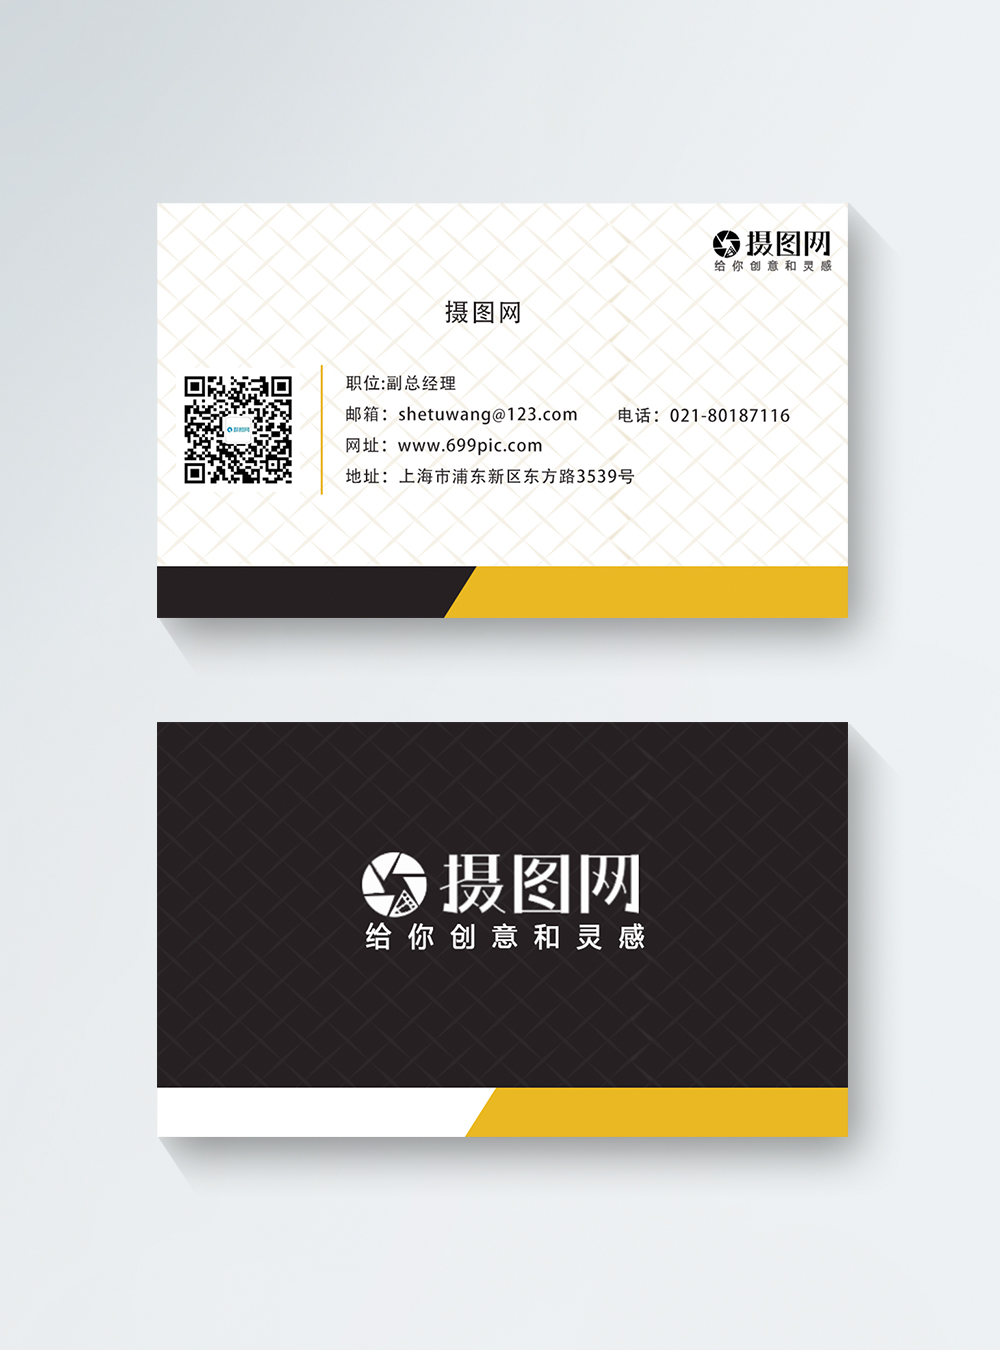 Download Yellow Black Minimalist Business Card Design Template Image Picture Free Download 401610790 Lovepik Com PSD Mockup Templates